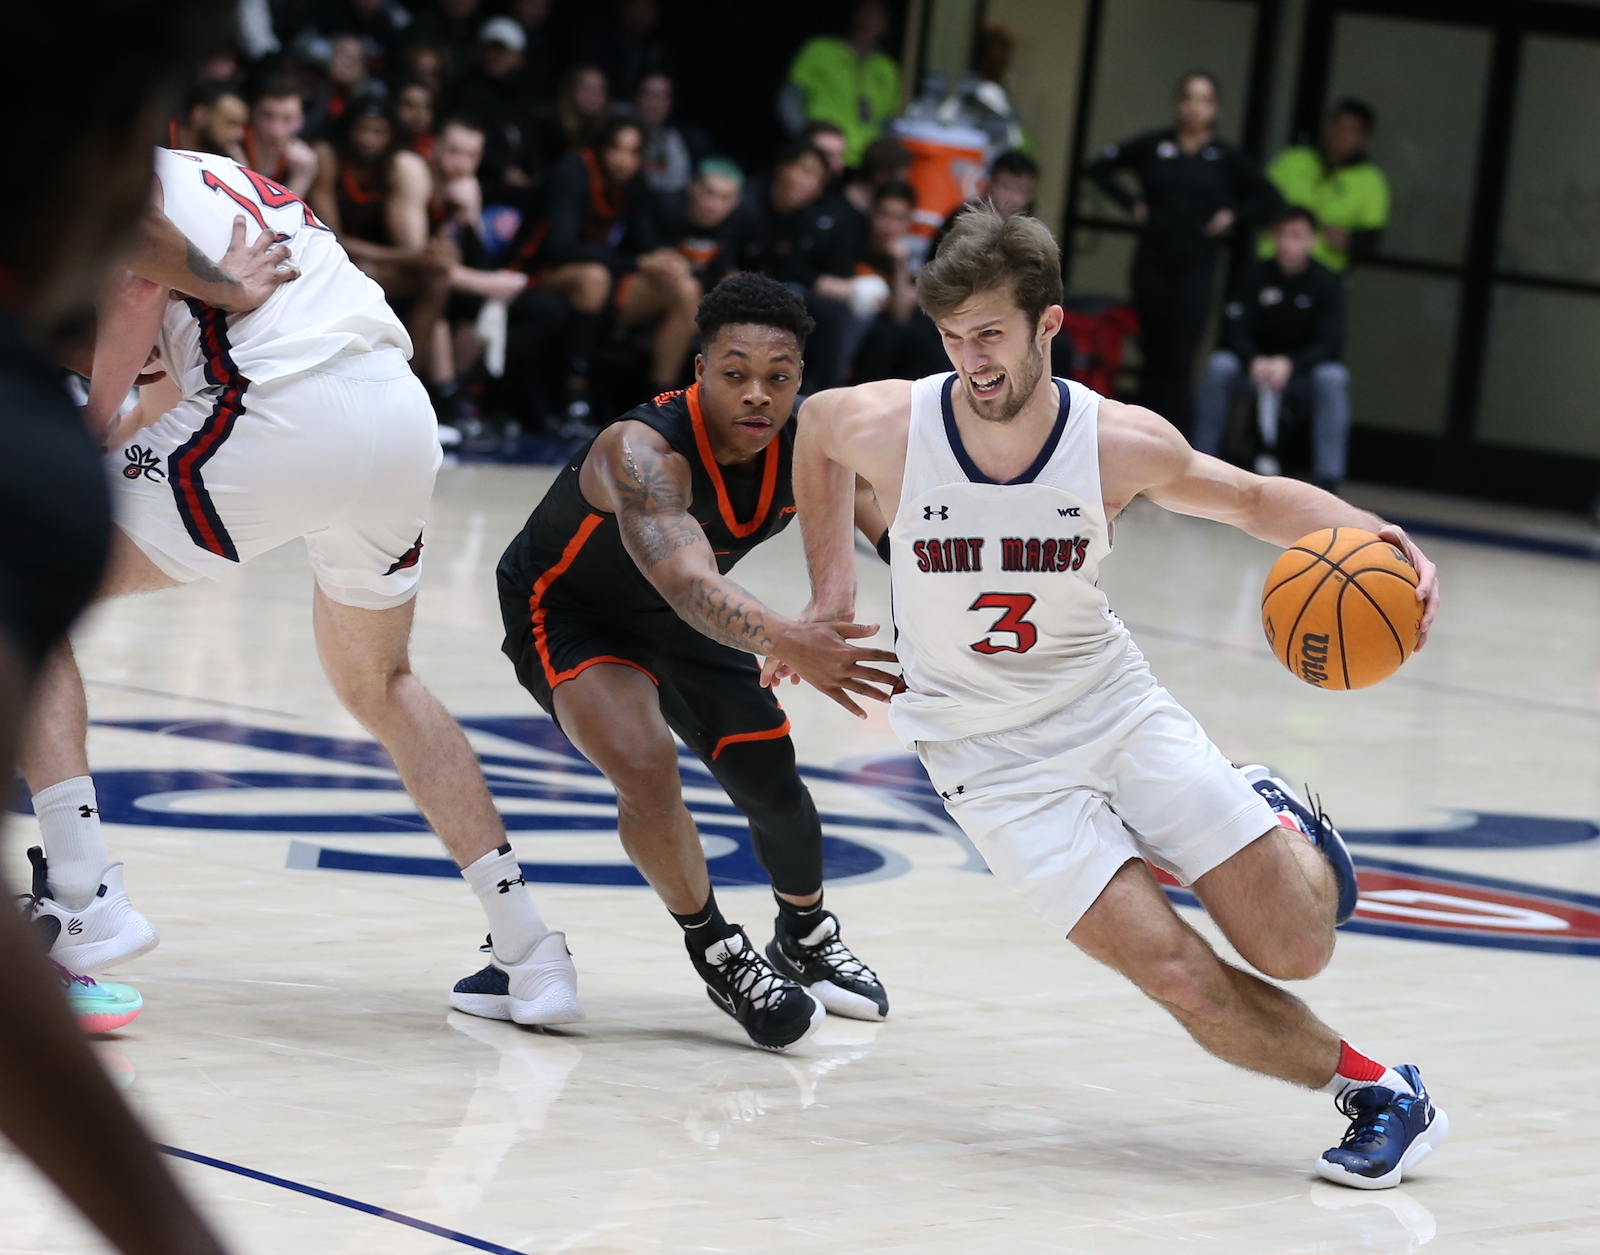 Basketball player Augustas Marciulionis drives against Pacific